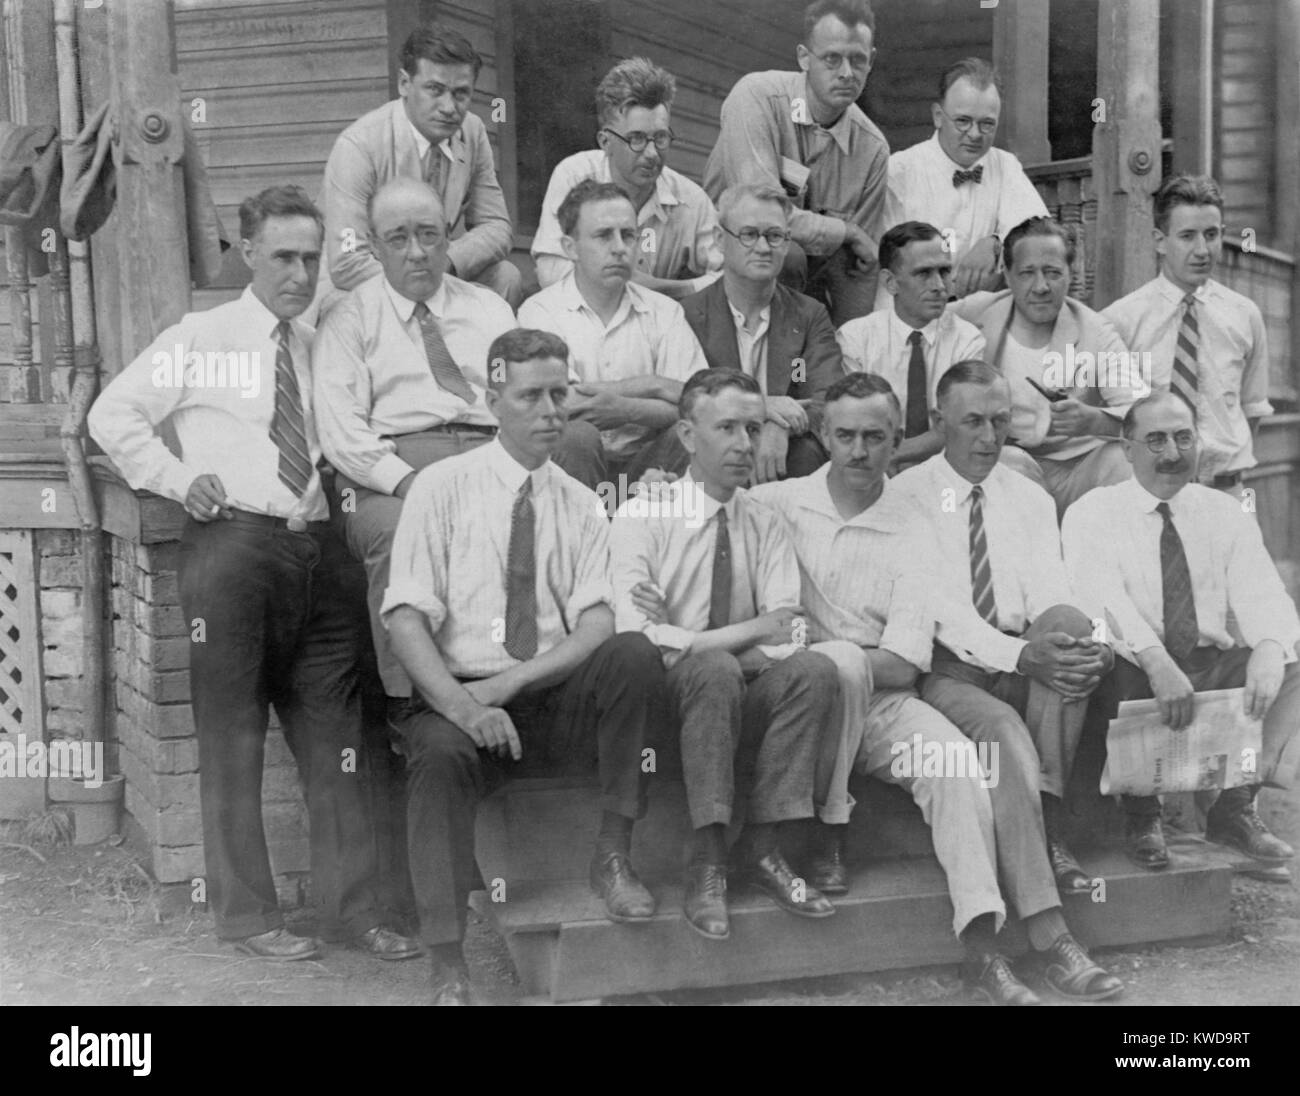 Lawyers, scientists, and supporters of the legal challenge to anti-evolution law, July 1925. Dayton, Tennessee. Standing at left: John R. Neal. Standing at right: W.E. Wheelock. Back row L-R: E. Haldeman-Julius, George Washington Rappleyea, Frank Thone, and Watson Davis. Middle row L-R: John R. Neal, Maynard Mayo Metcalf, Charles Francis Potter, Mr. McCleskey, William Allison Kepner, Arthur Garfield Hays, W.E. Wheelock. Front row L-R: Wilbur Armstrong Nelson, Fay-Cooper Cole, Winterton Conway Curtis, Horatio Hackett Newman, and Jacob Goodale Lipman (BSLOC 2016 10 66) Stock Photo